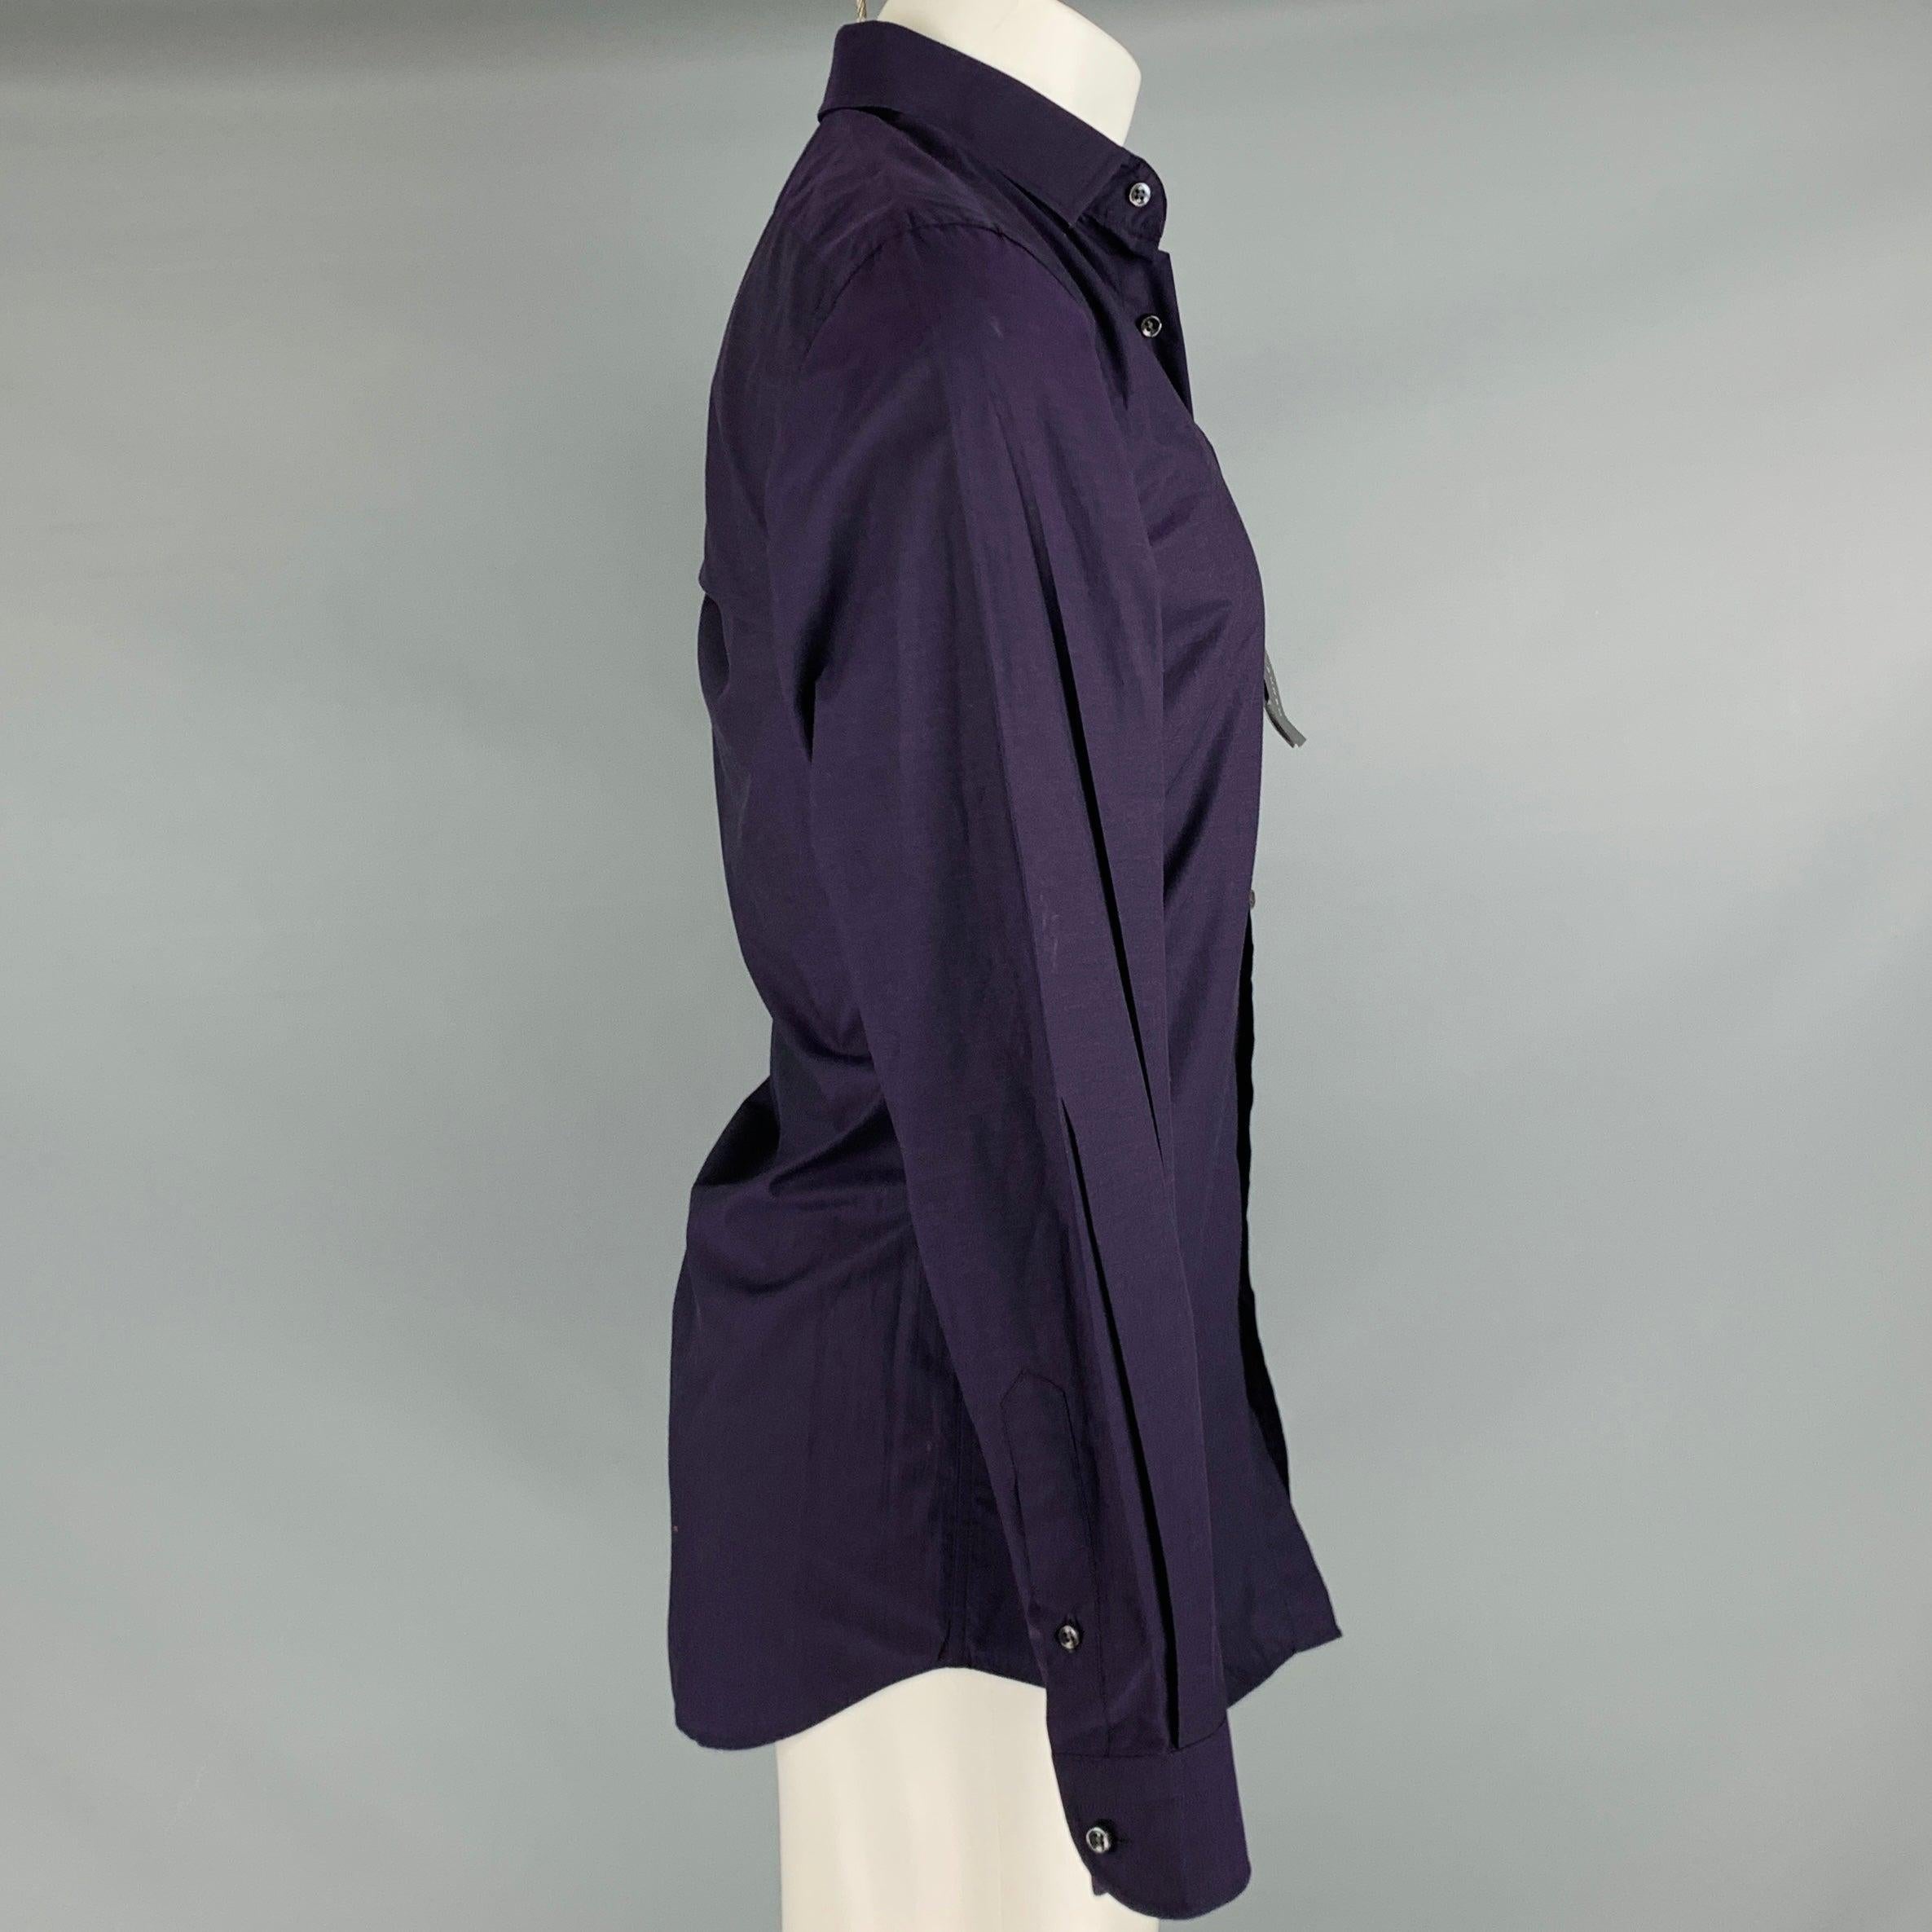 RALPH LAUREN BLACK LABEL long sleeve shirt
in a purple cotton fabric featuring spread collar, and button closure. Made in Italy.New with Tags. 

Marked:   15 

Measurements: 
 
Shoulder: 16.5 inches Chest: 38 inches Sleeve: 26 inches Length: 32